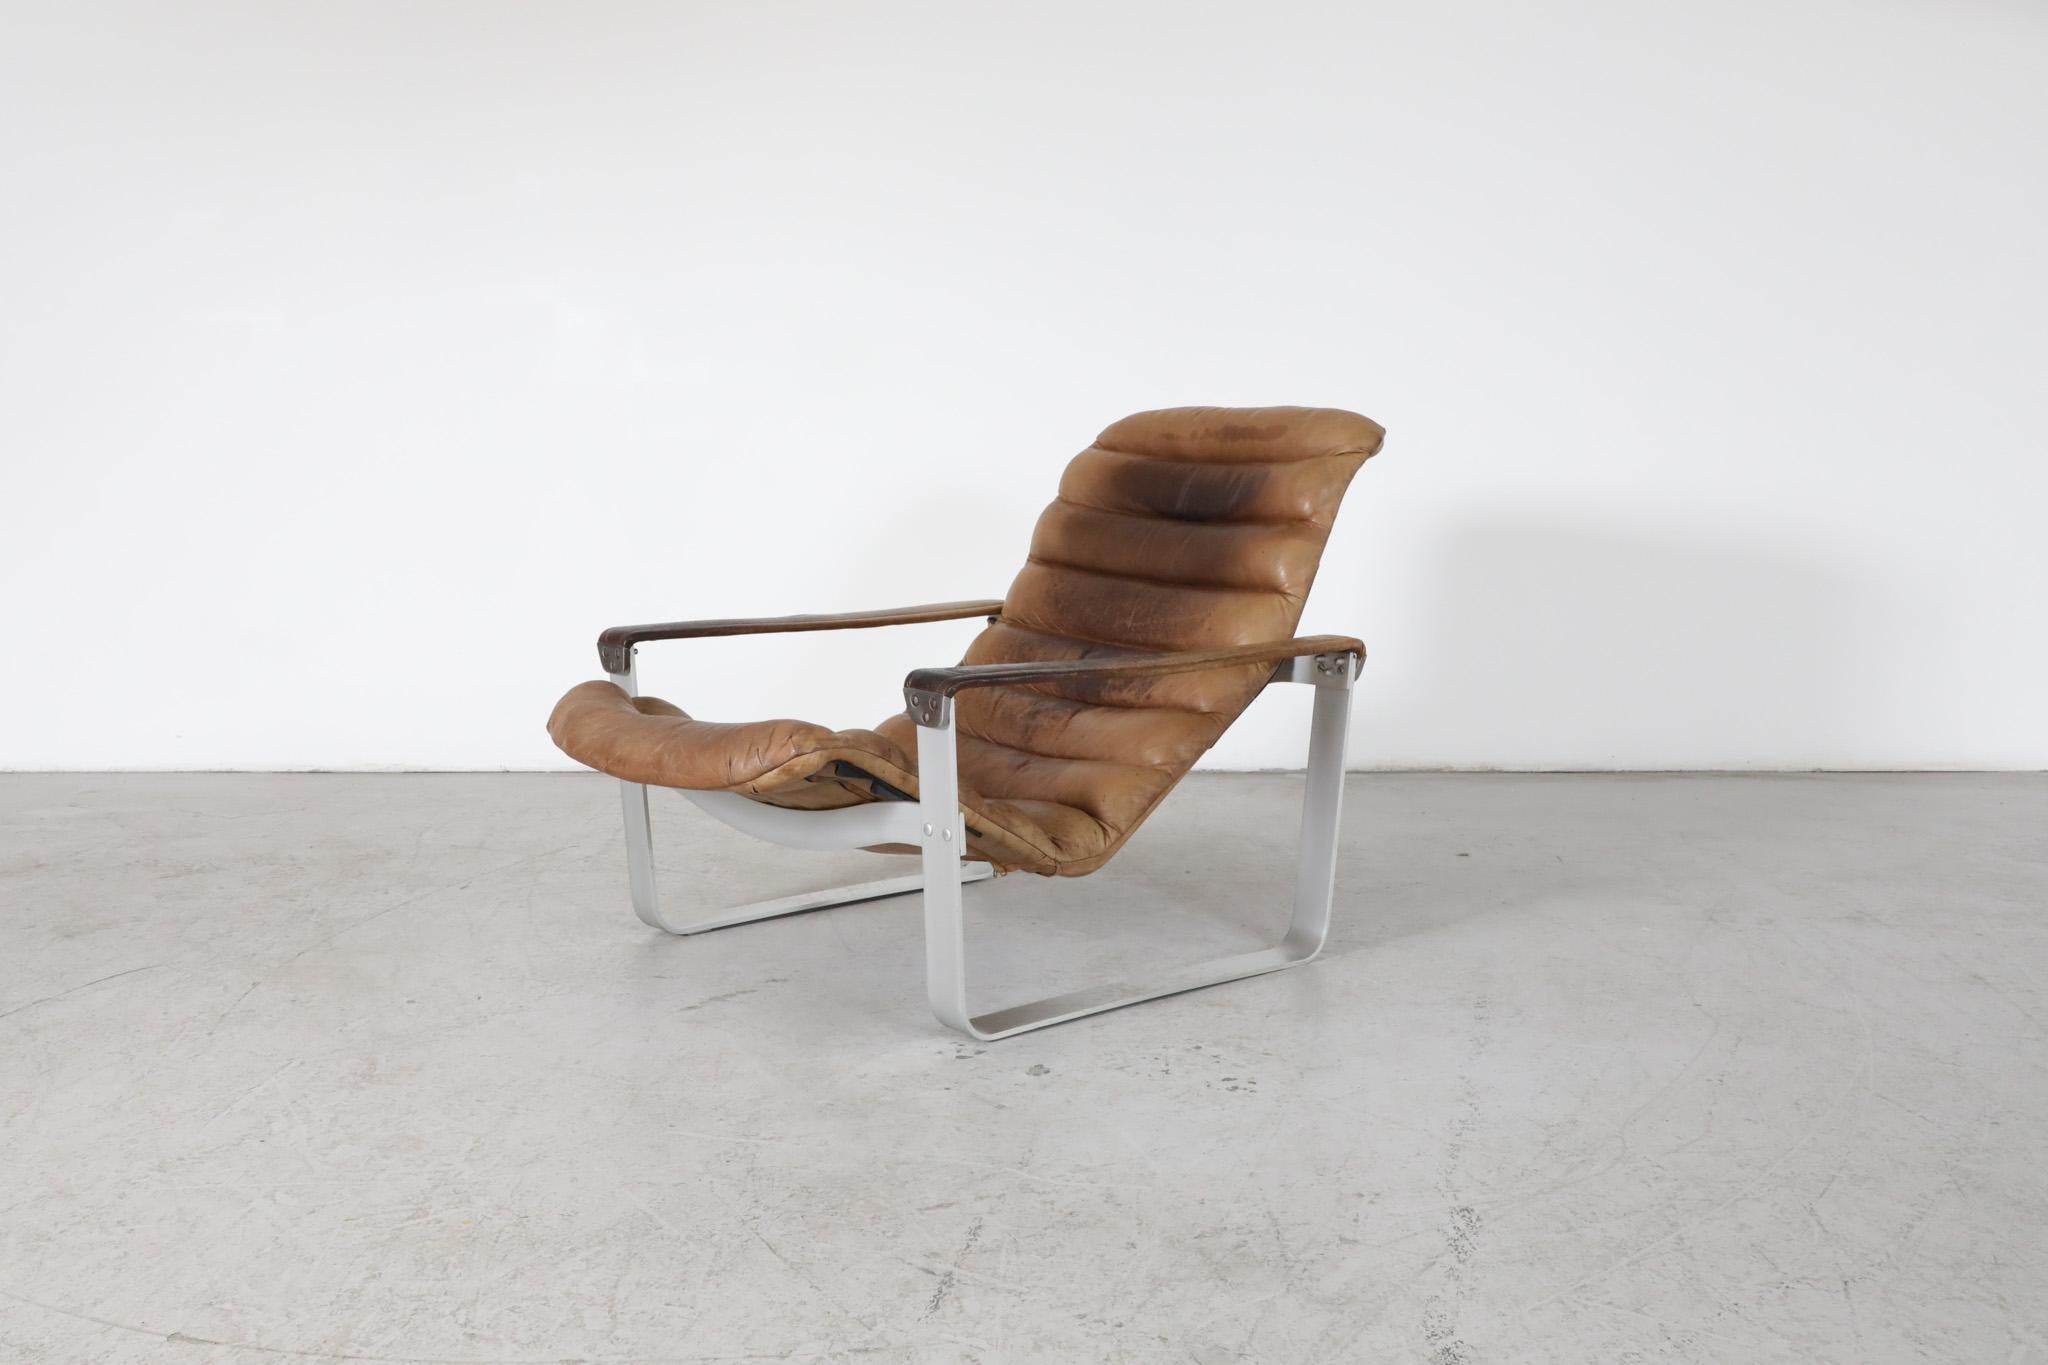 Mid-Century 'Pulkka' leather lounge chair by Ilmari Lappalainen for Asko. Ilmari Lappalainen (1918–2006) first graduated as a woodwork teacher in 1939 and as an interior architect in 1947. After graduation, he got a designer's position at the Asko